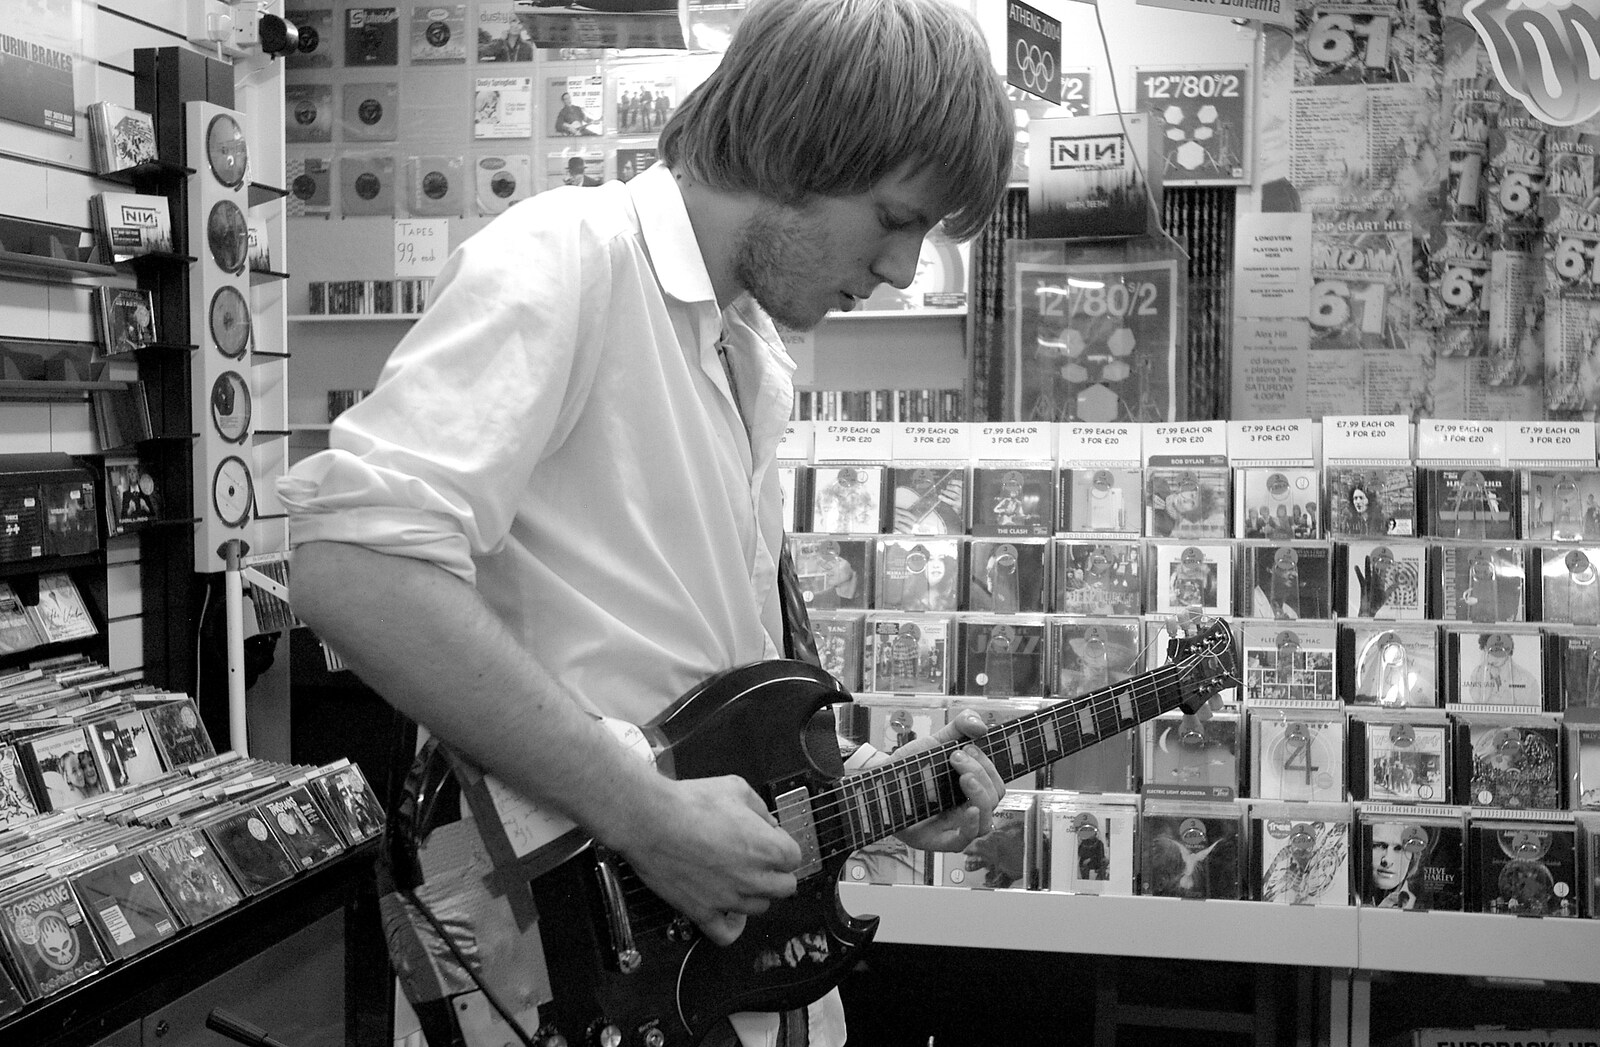 Tom gets into it from Richard Panton's Van and Alex Hill at Revolution Records, Diss and Cambridge - 29th July 2005